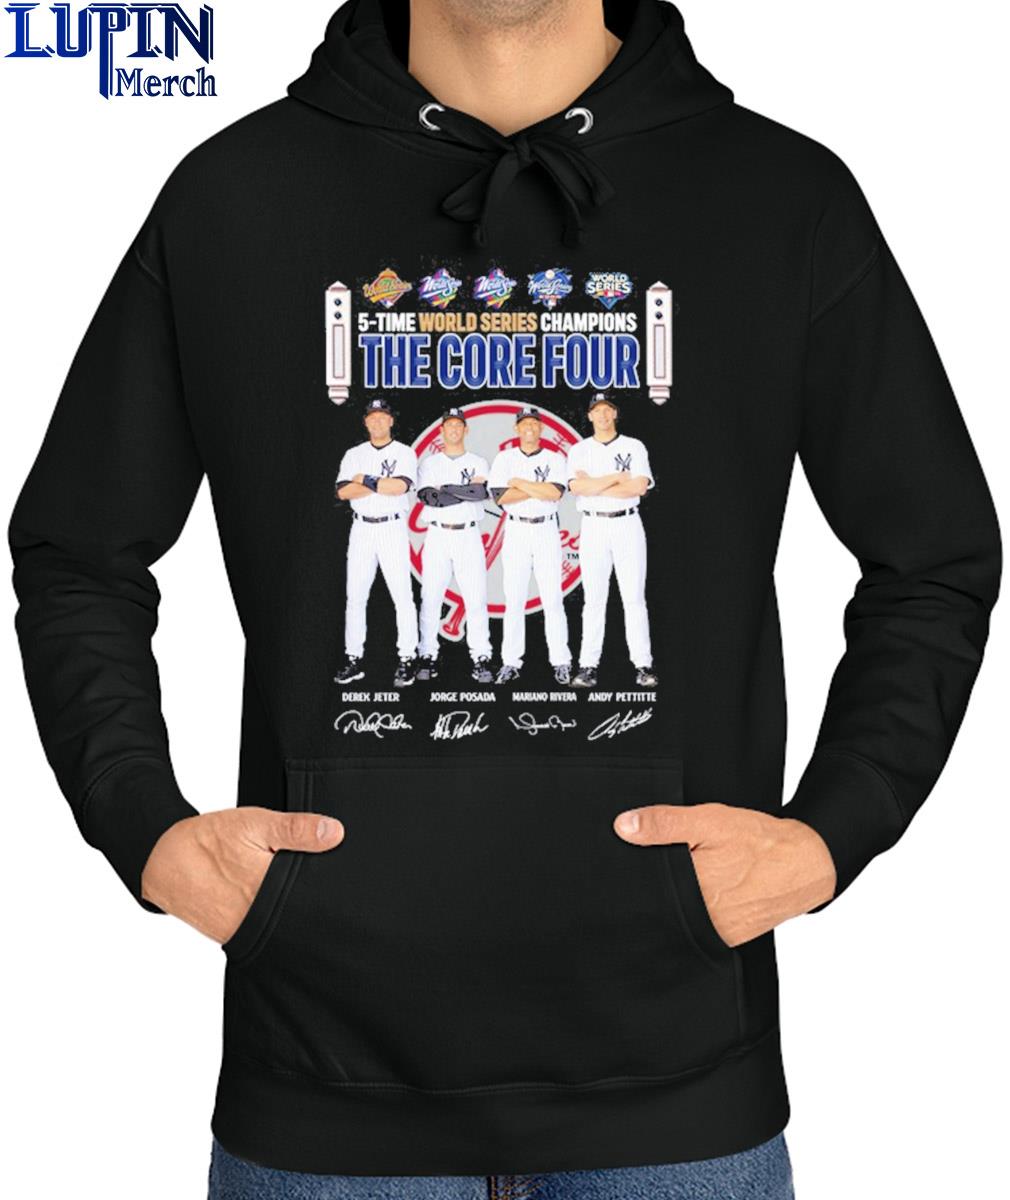 The core four new york yankees 5 time T-shirt, hoodie, sweater